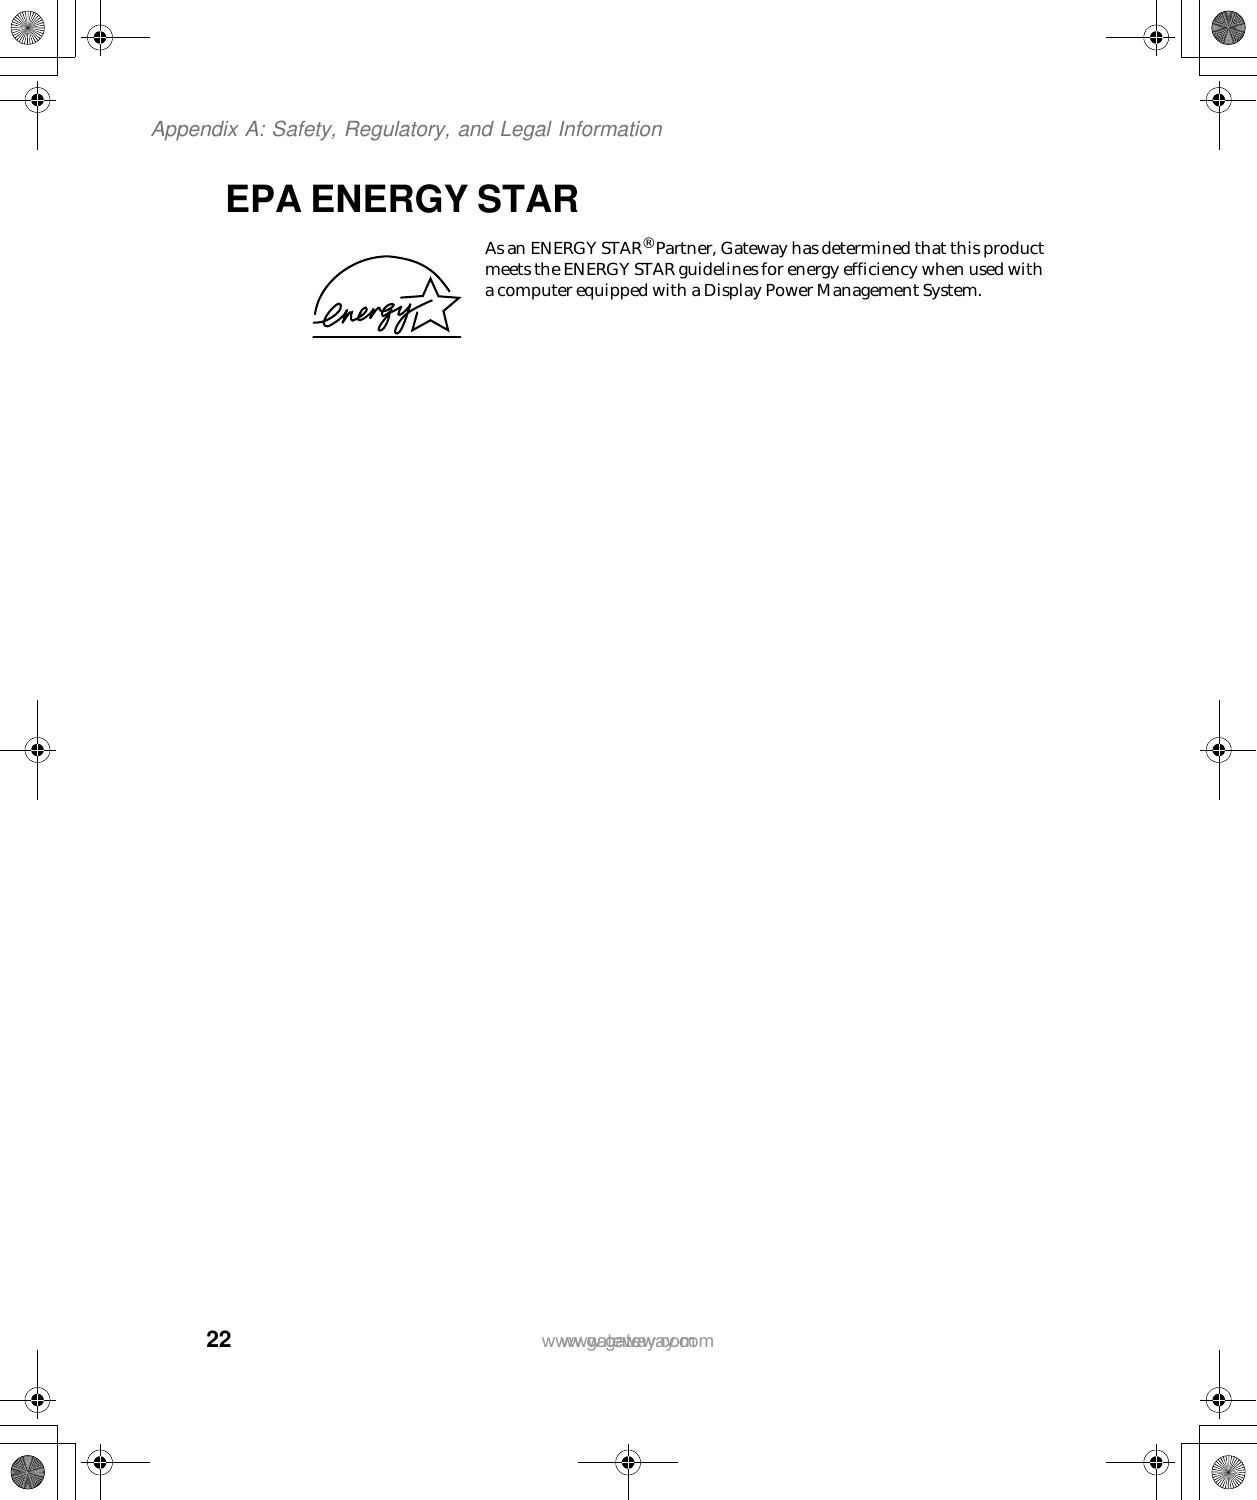 www.gateway.comEPA ENERGY STARAs an ENERGY STAR® Partner, Gateway has determined that this product meets the ENERGY STAR guidelines for energy efficiency when used with a computer equipped with a Display Power Management System.22Appendix A: Safety, Regulatory, and Legal Informationwww.gateway.com